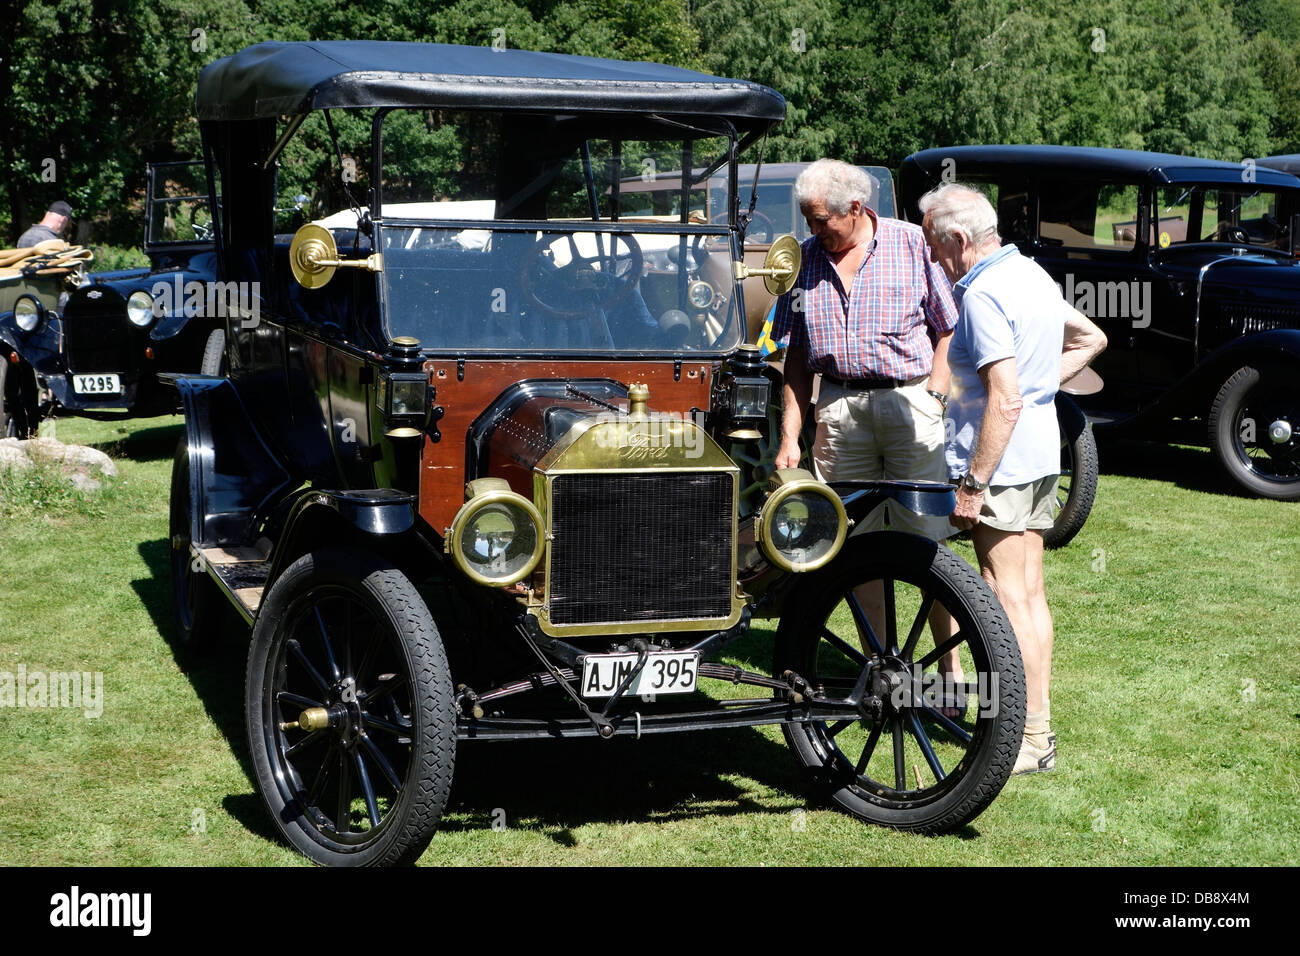 Antique cars meeting. Two senior men inspect an antique motorcar Ford T model from 1914. Stock Photo